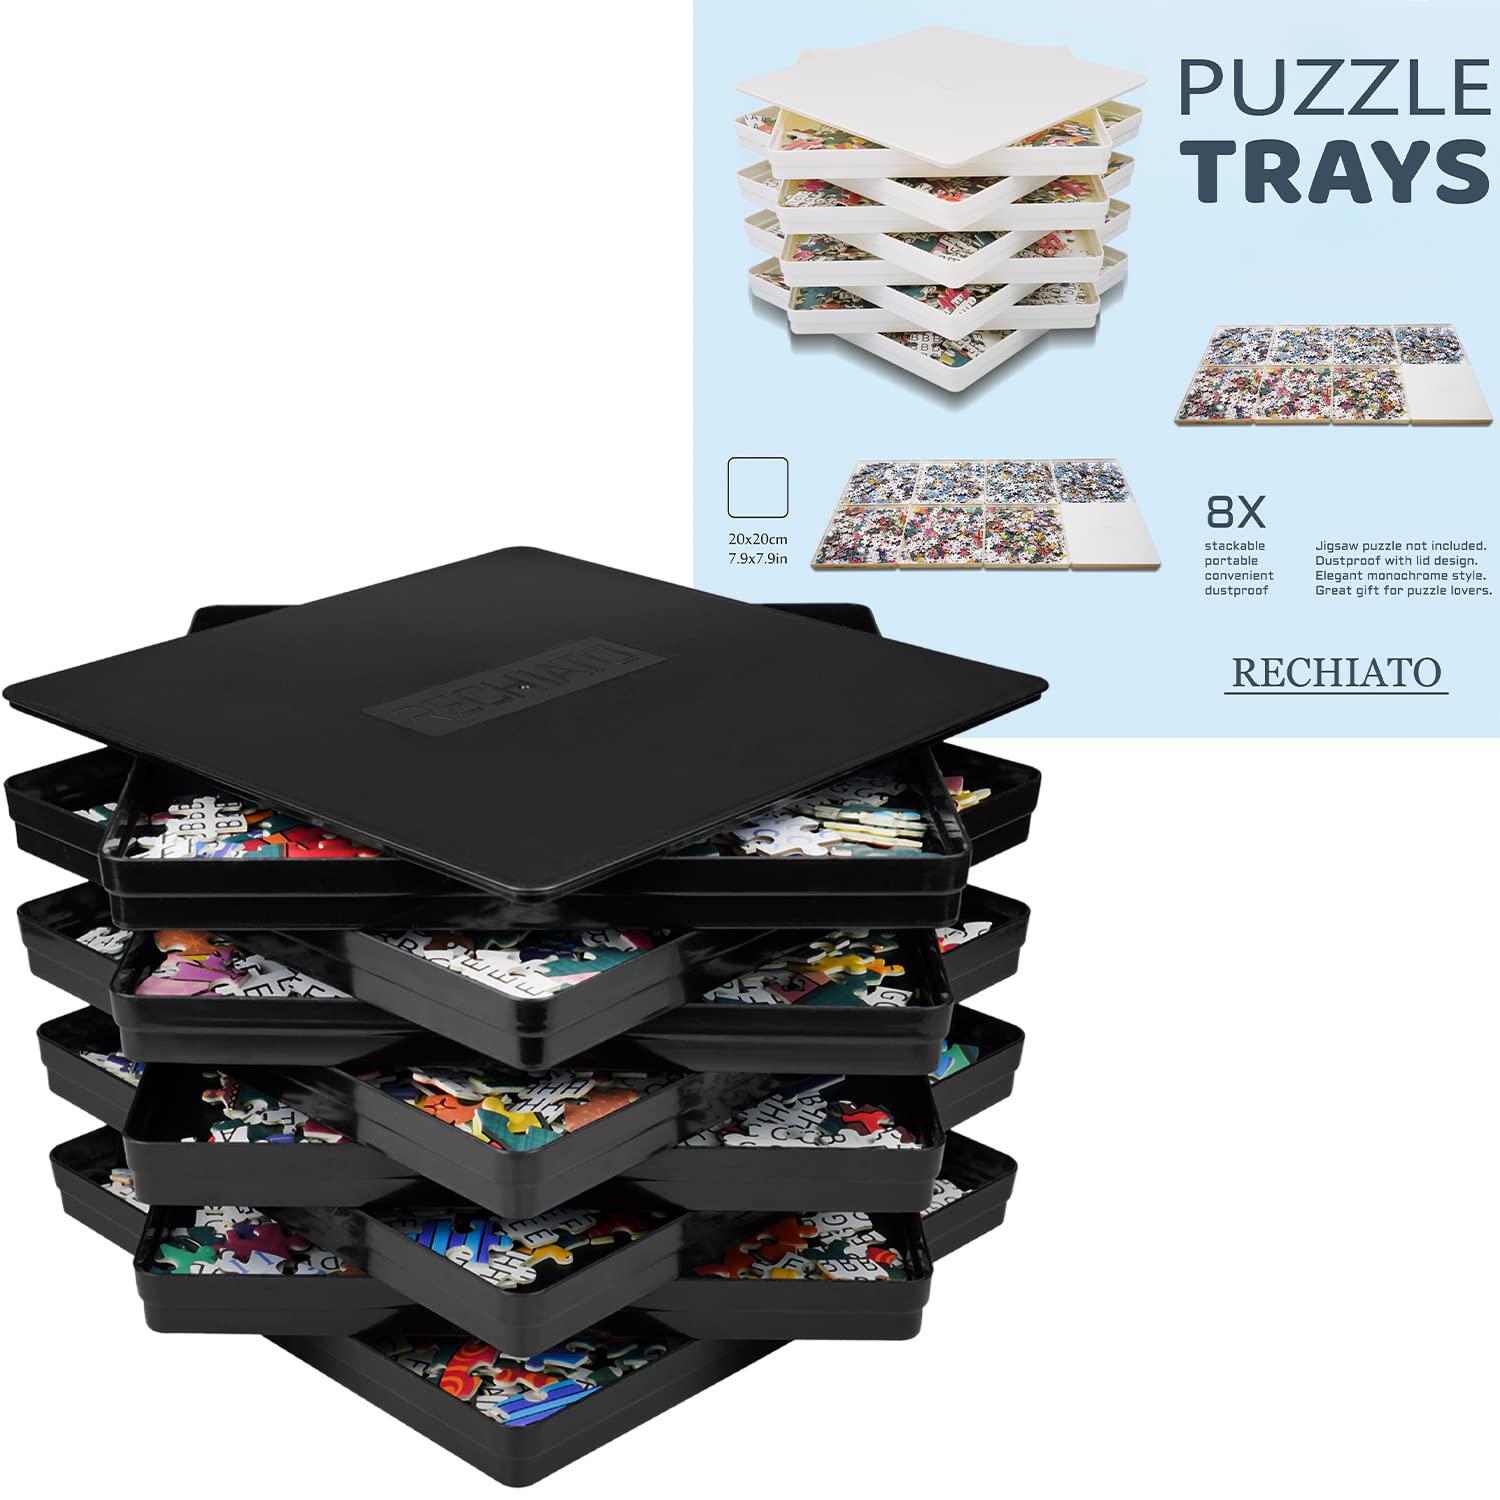 RECHIATO rechiato 8 puzzle sorting trays with lid 8x8 premiunm puzzle trays  gift for puzzles 1000-1500 pieces